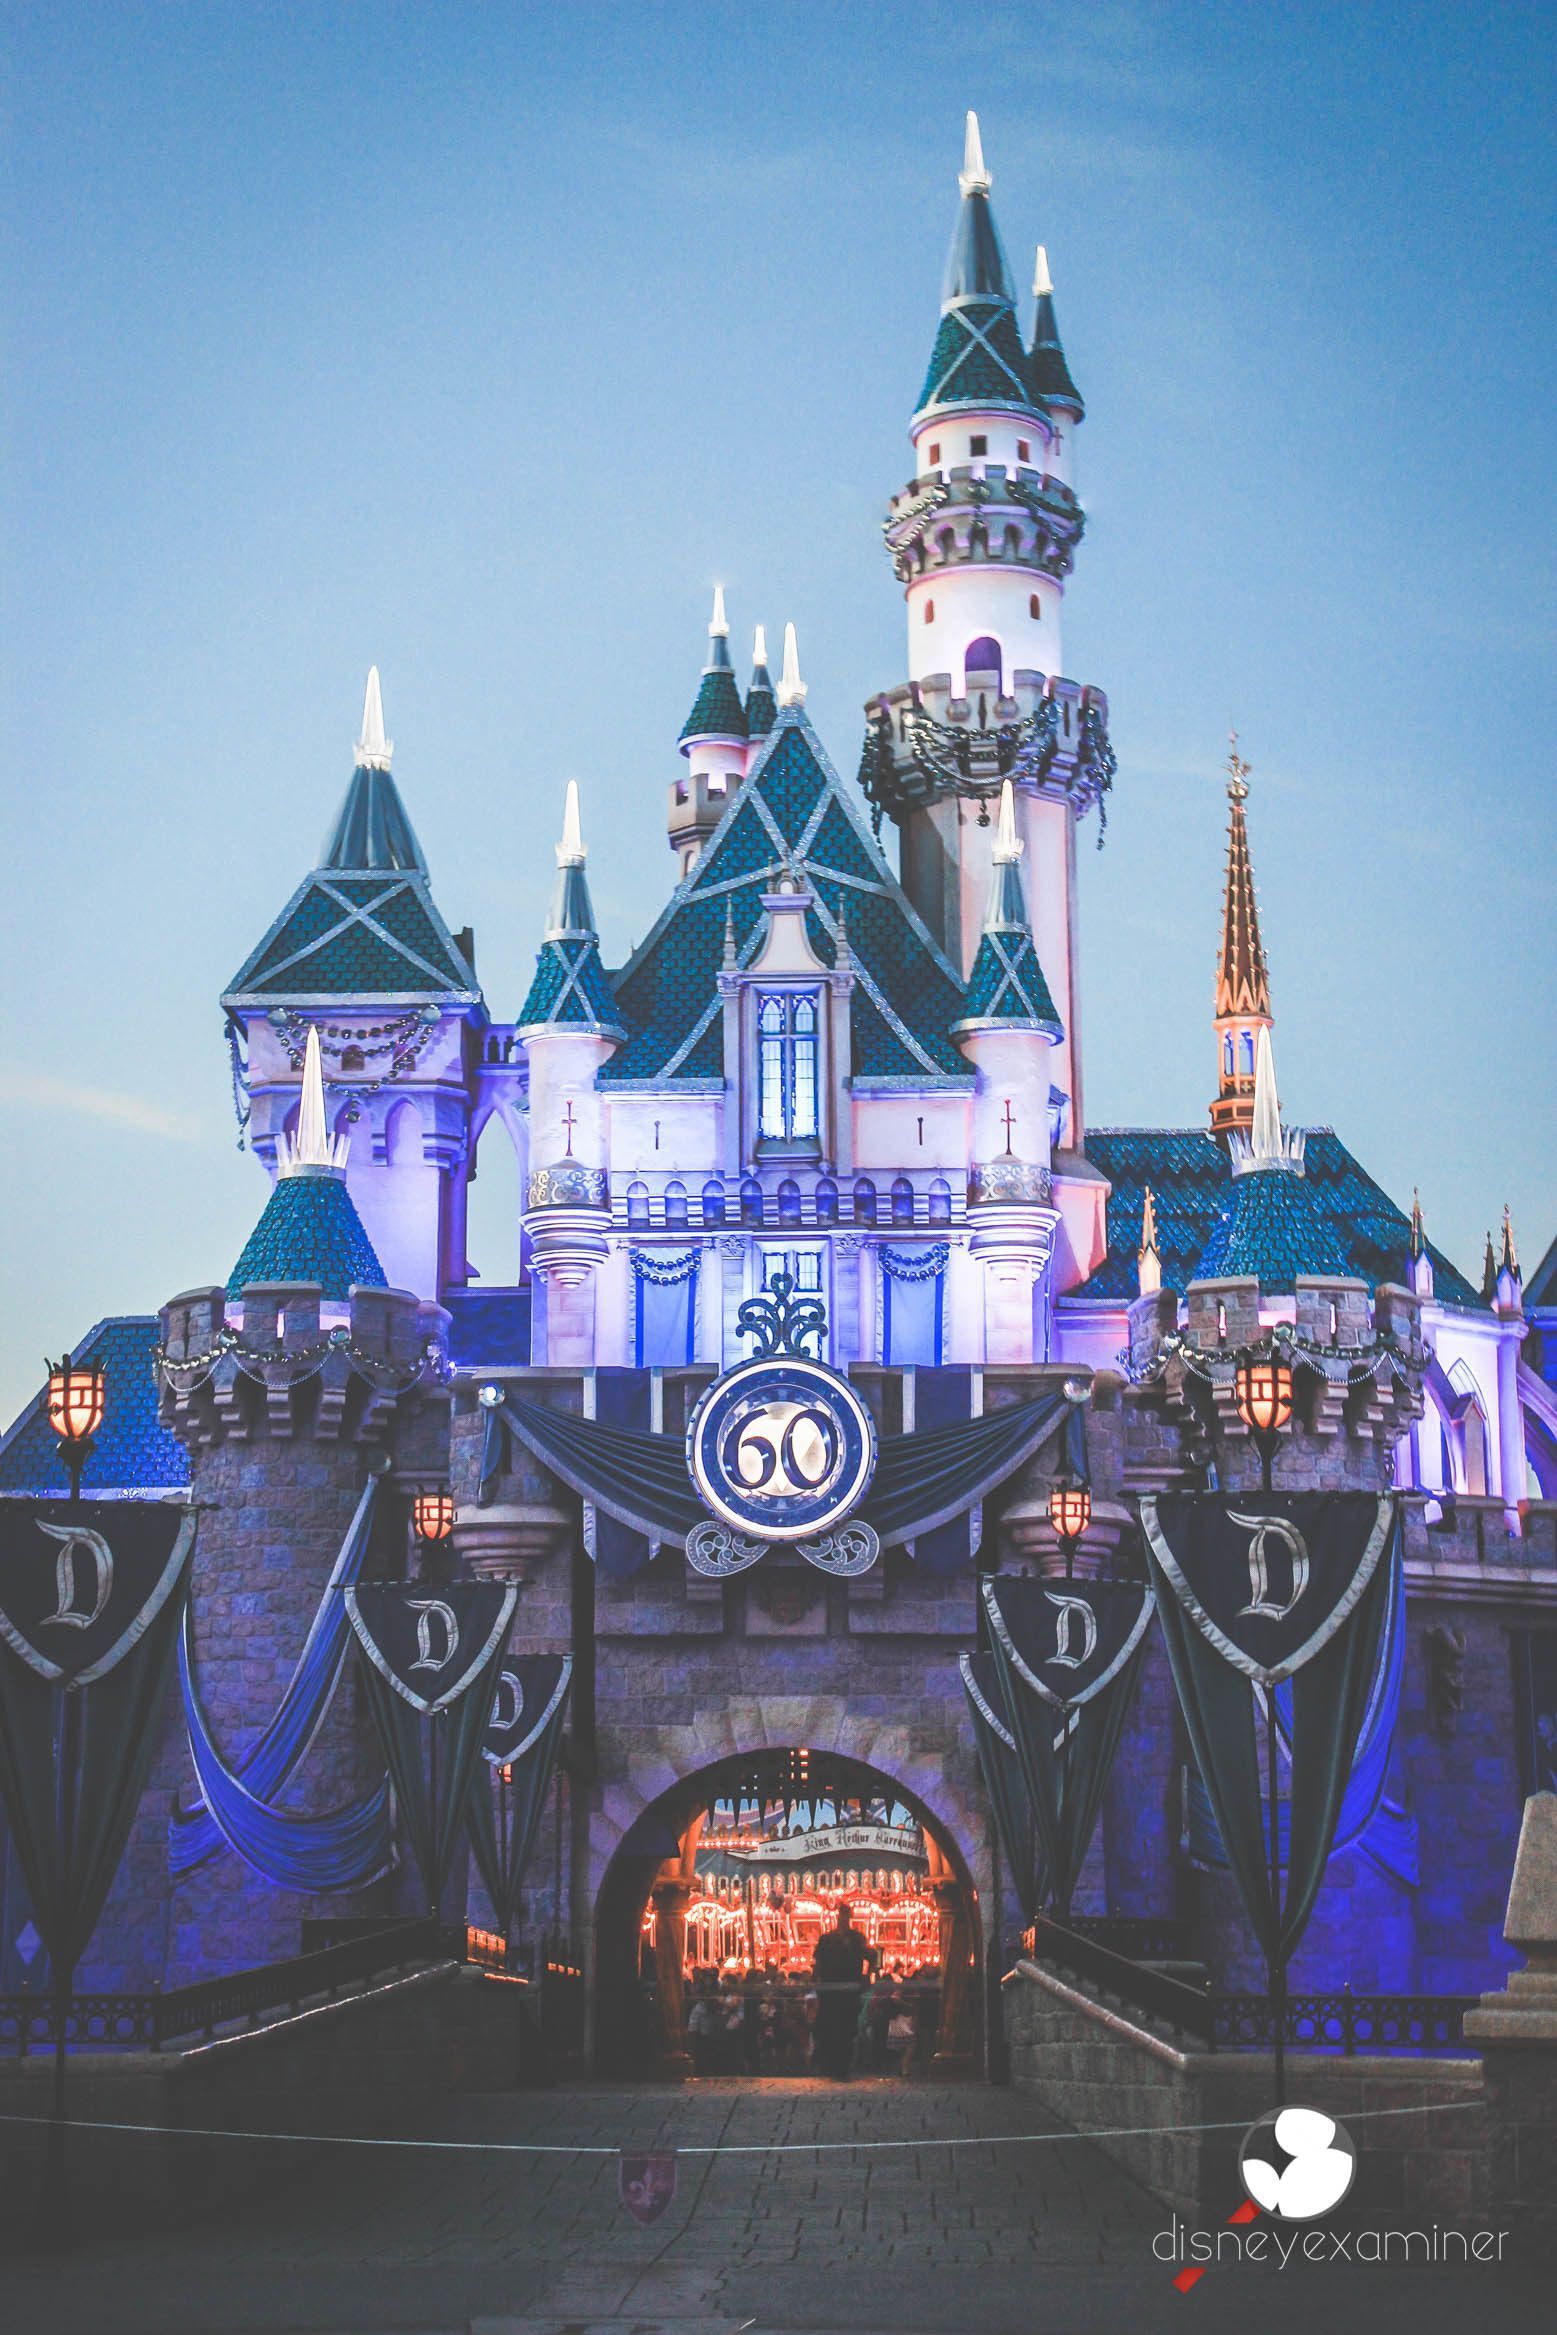 Disneyland 60th anniversary castle with a banner that says 